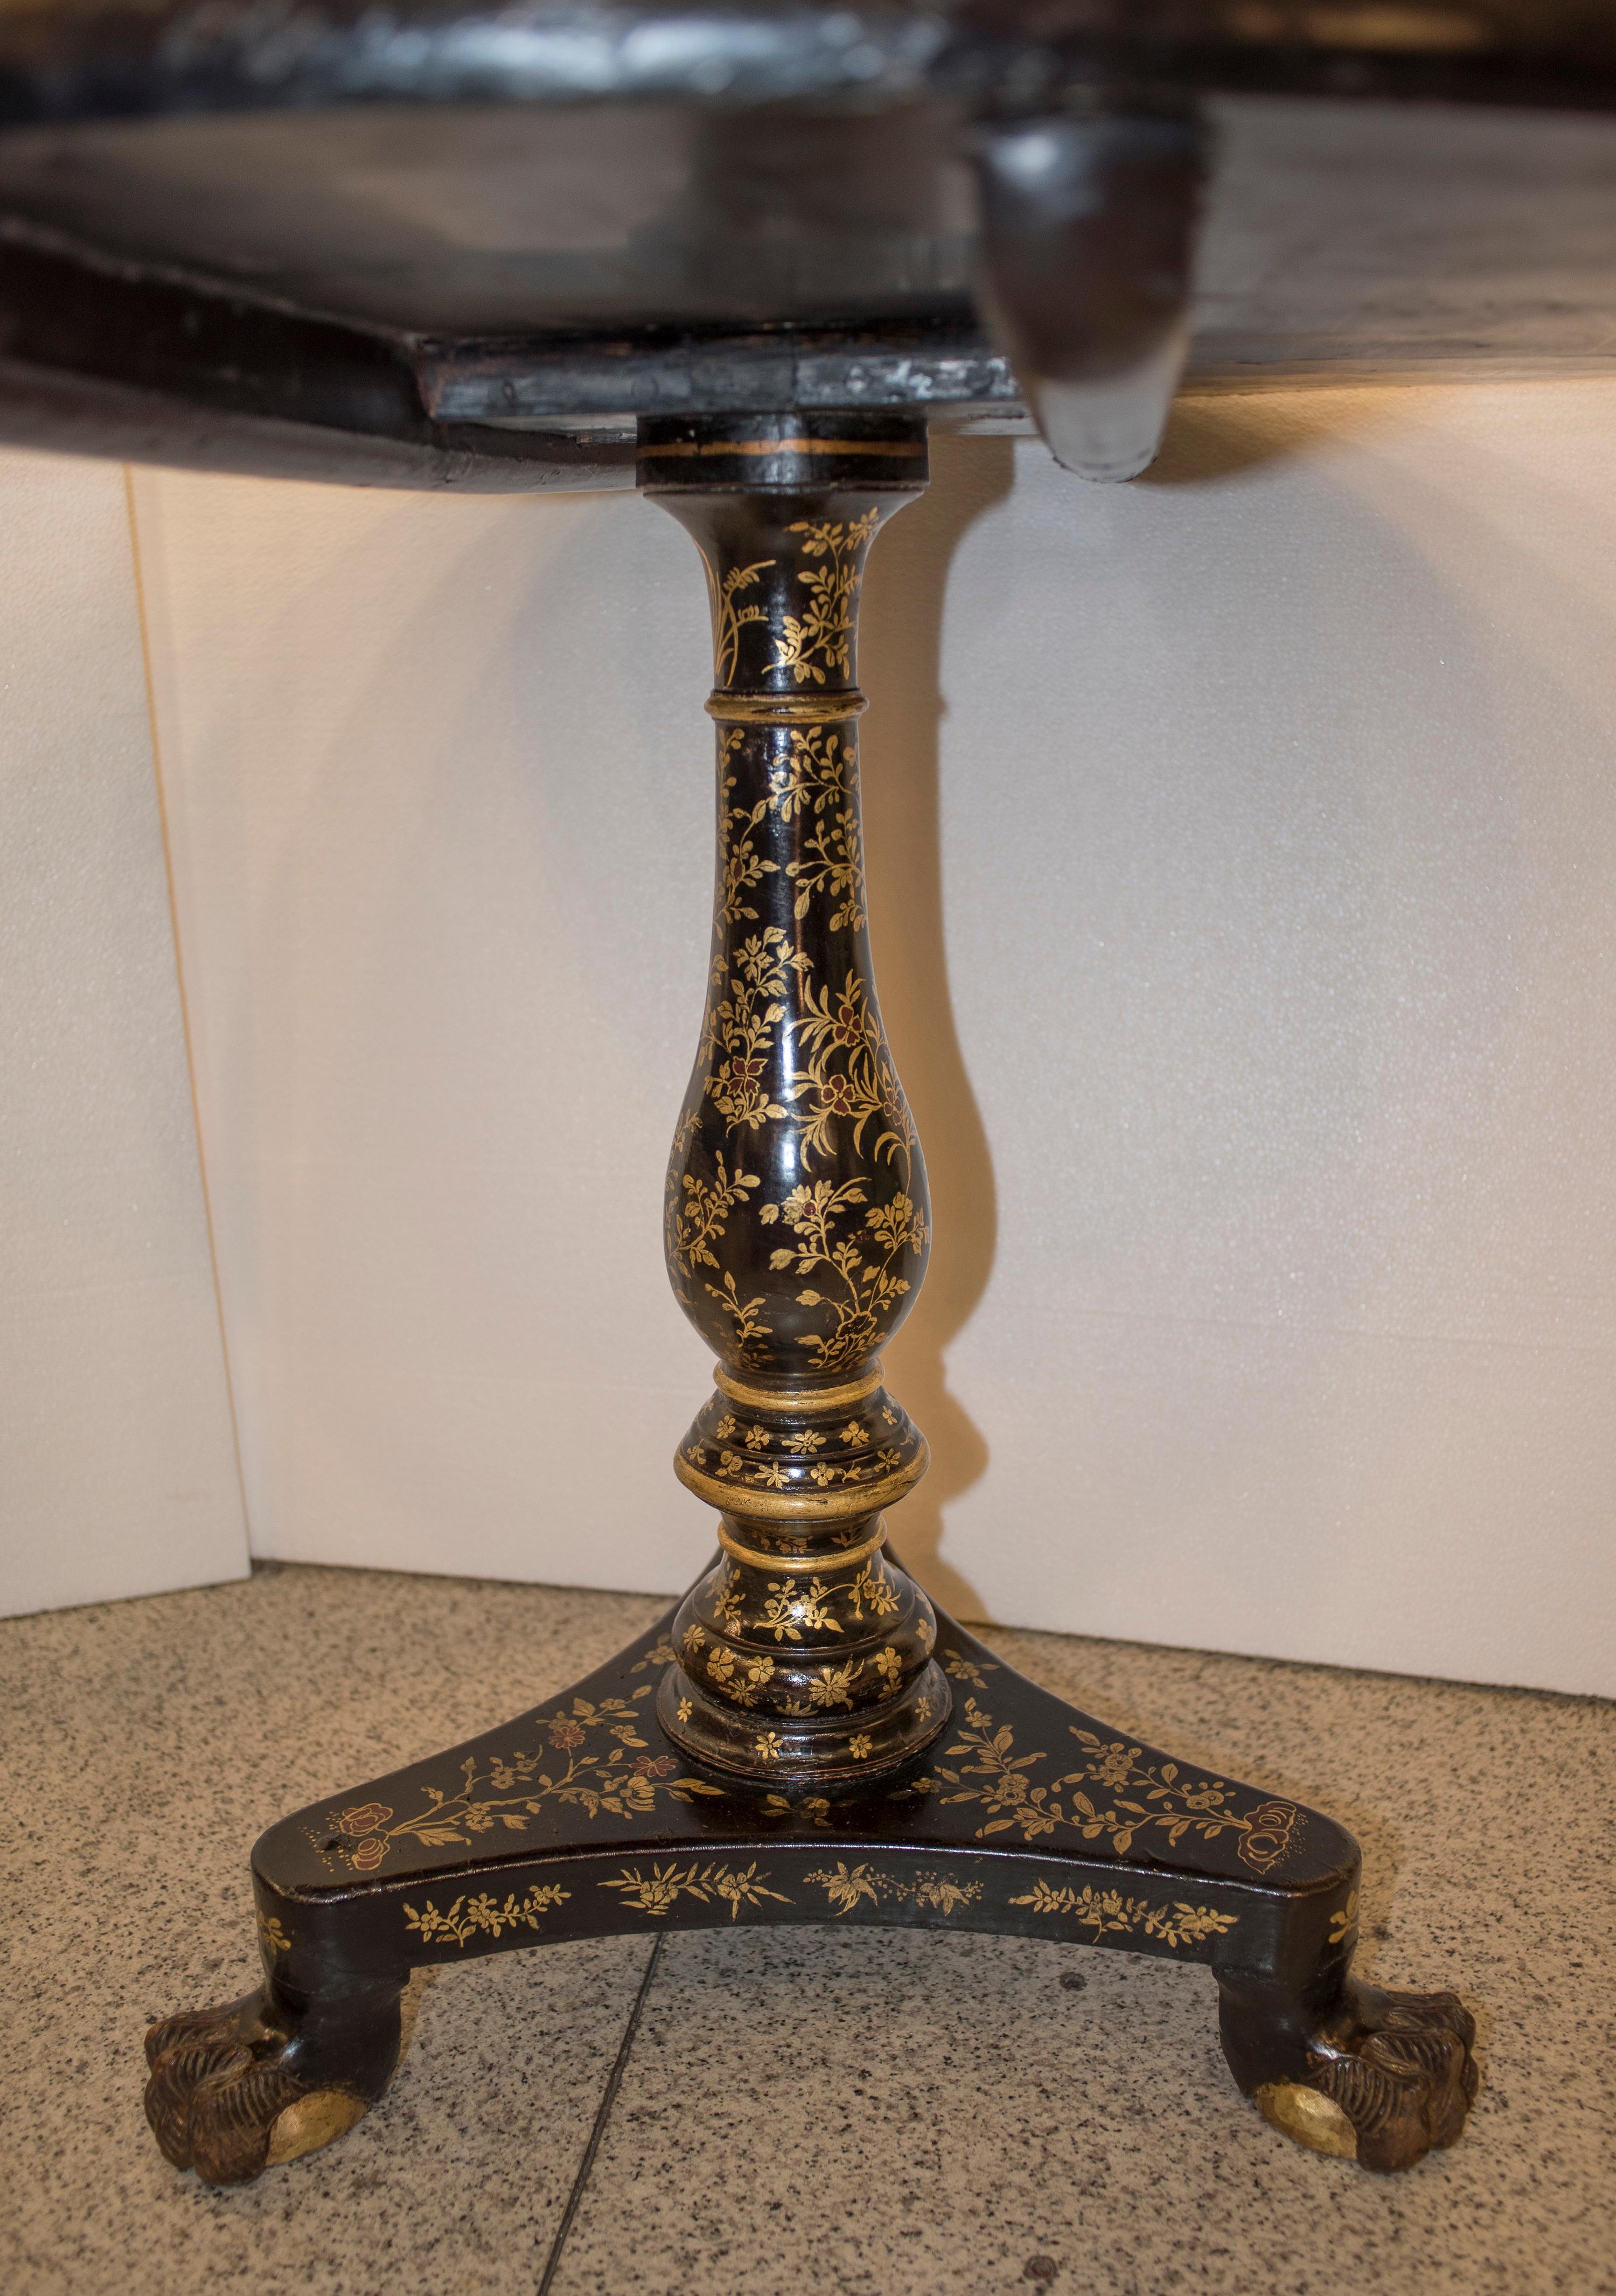 Early Victorian 19th Century Tilt-Top Lacquered and Gilded Wood English Table with Chinoiseries